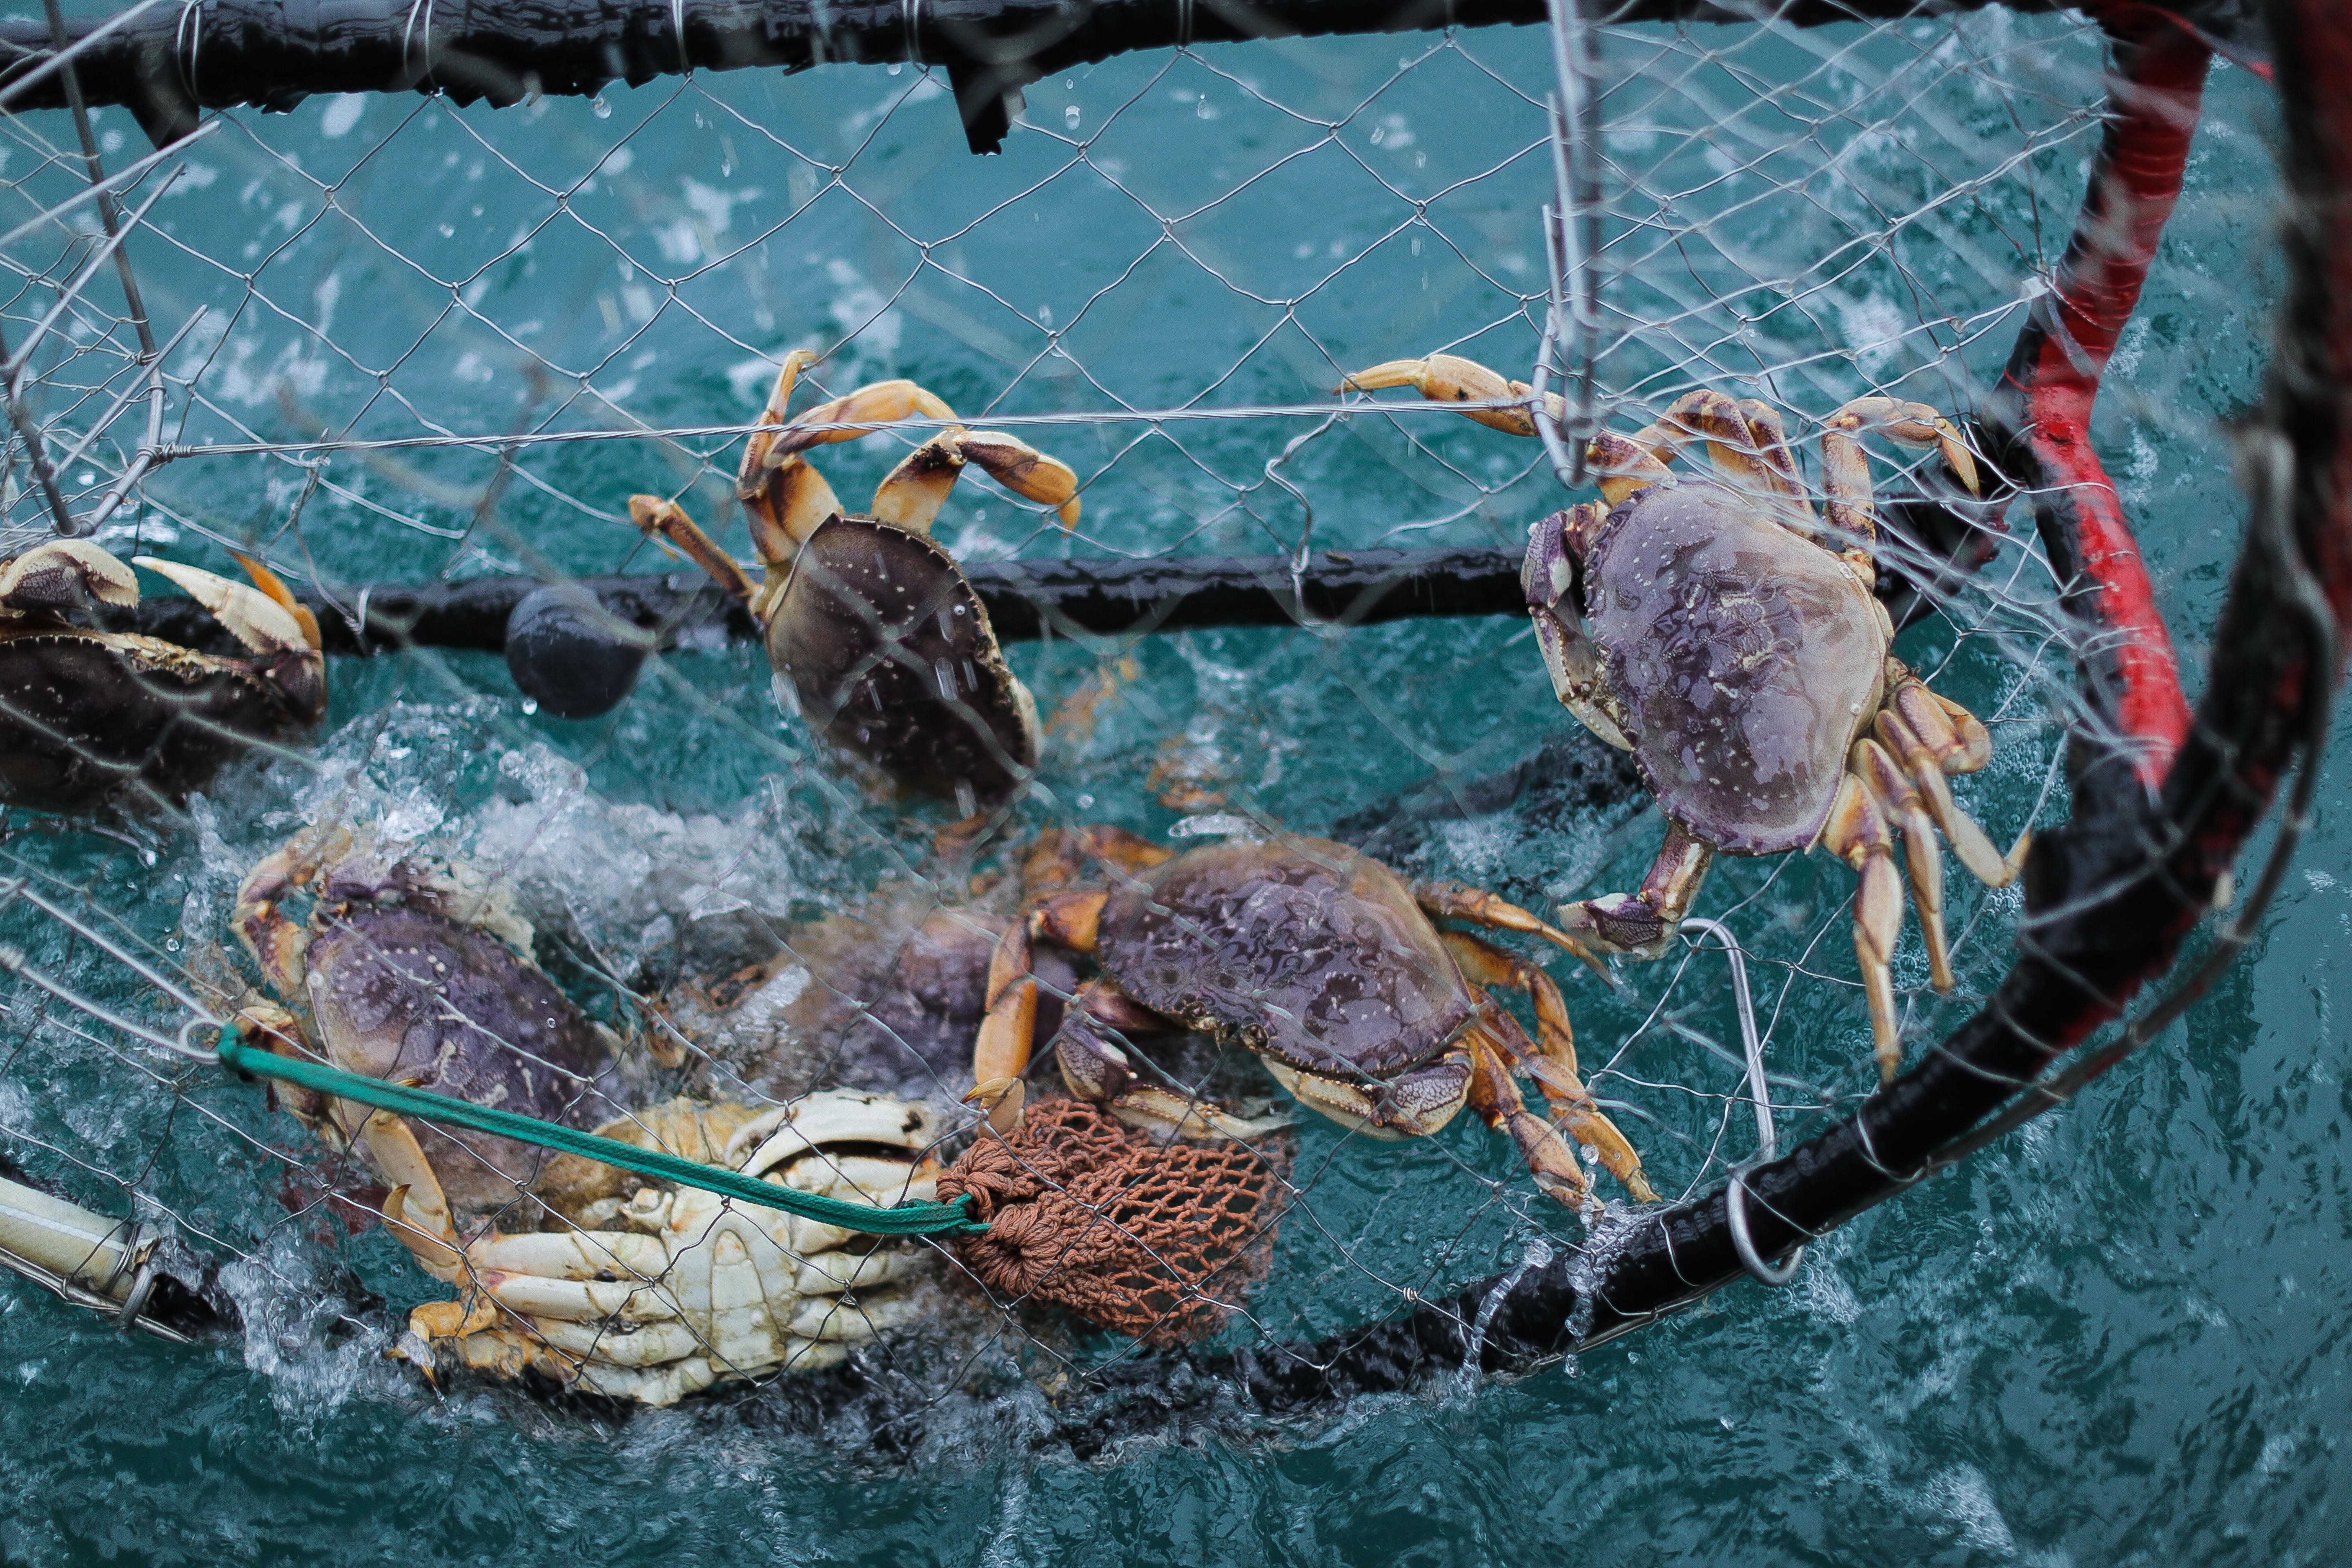 Dungeness crab season in Oregon reaches record-breaking value - OPB